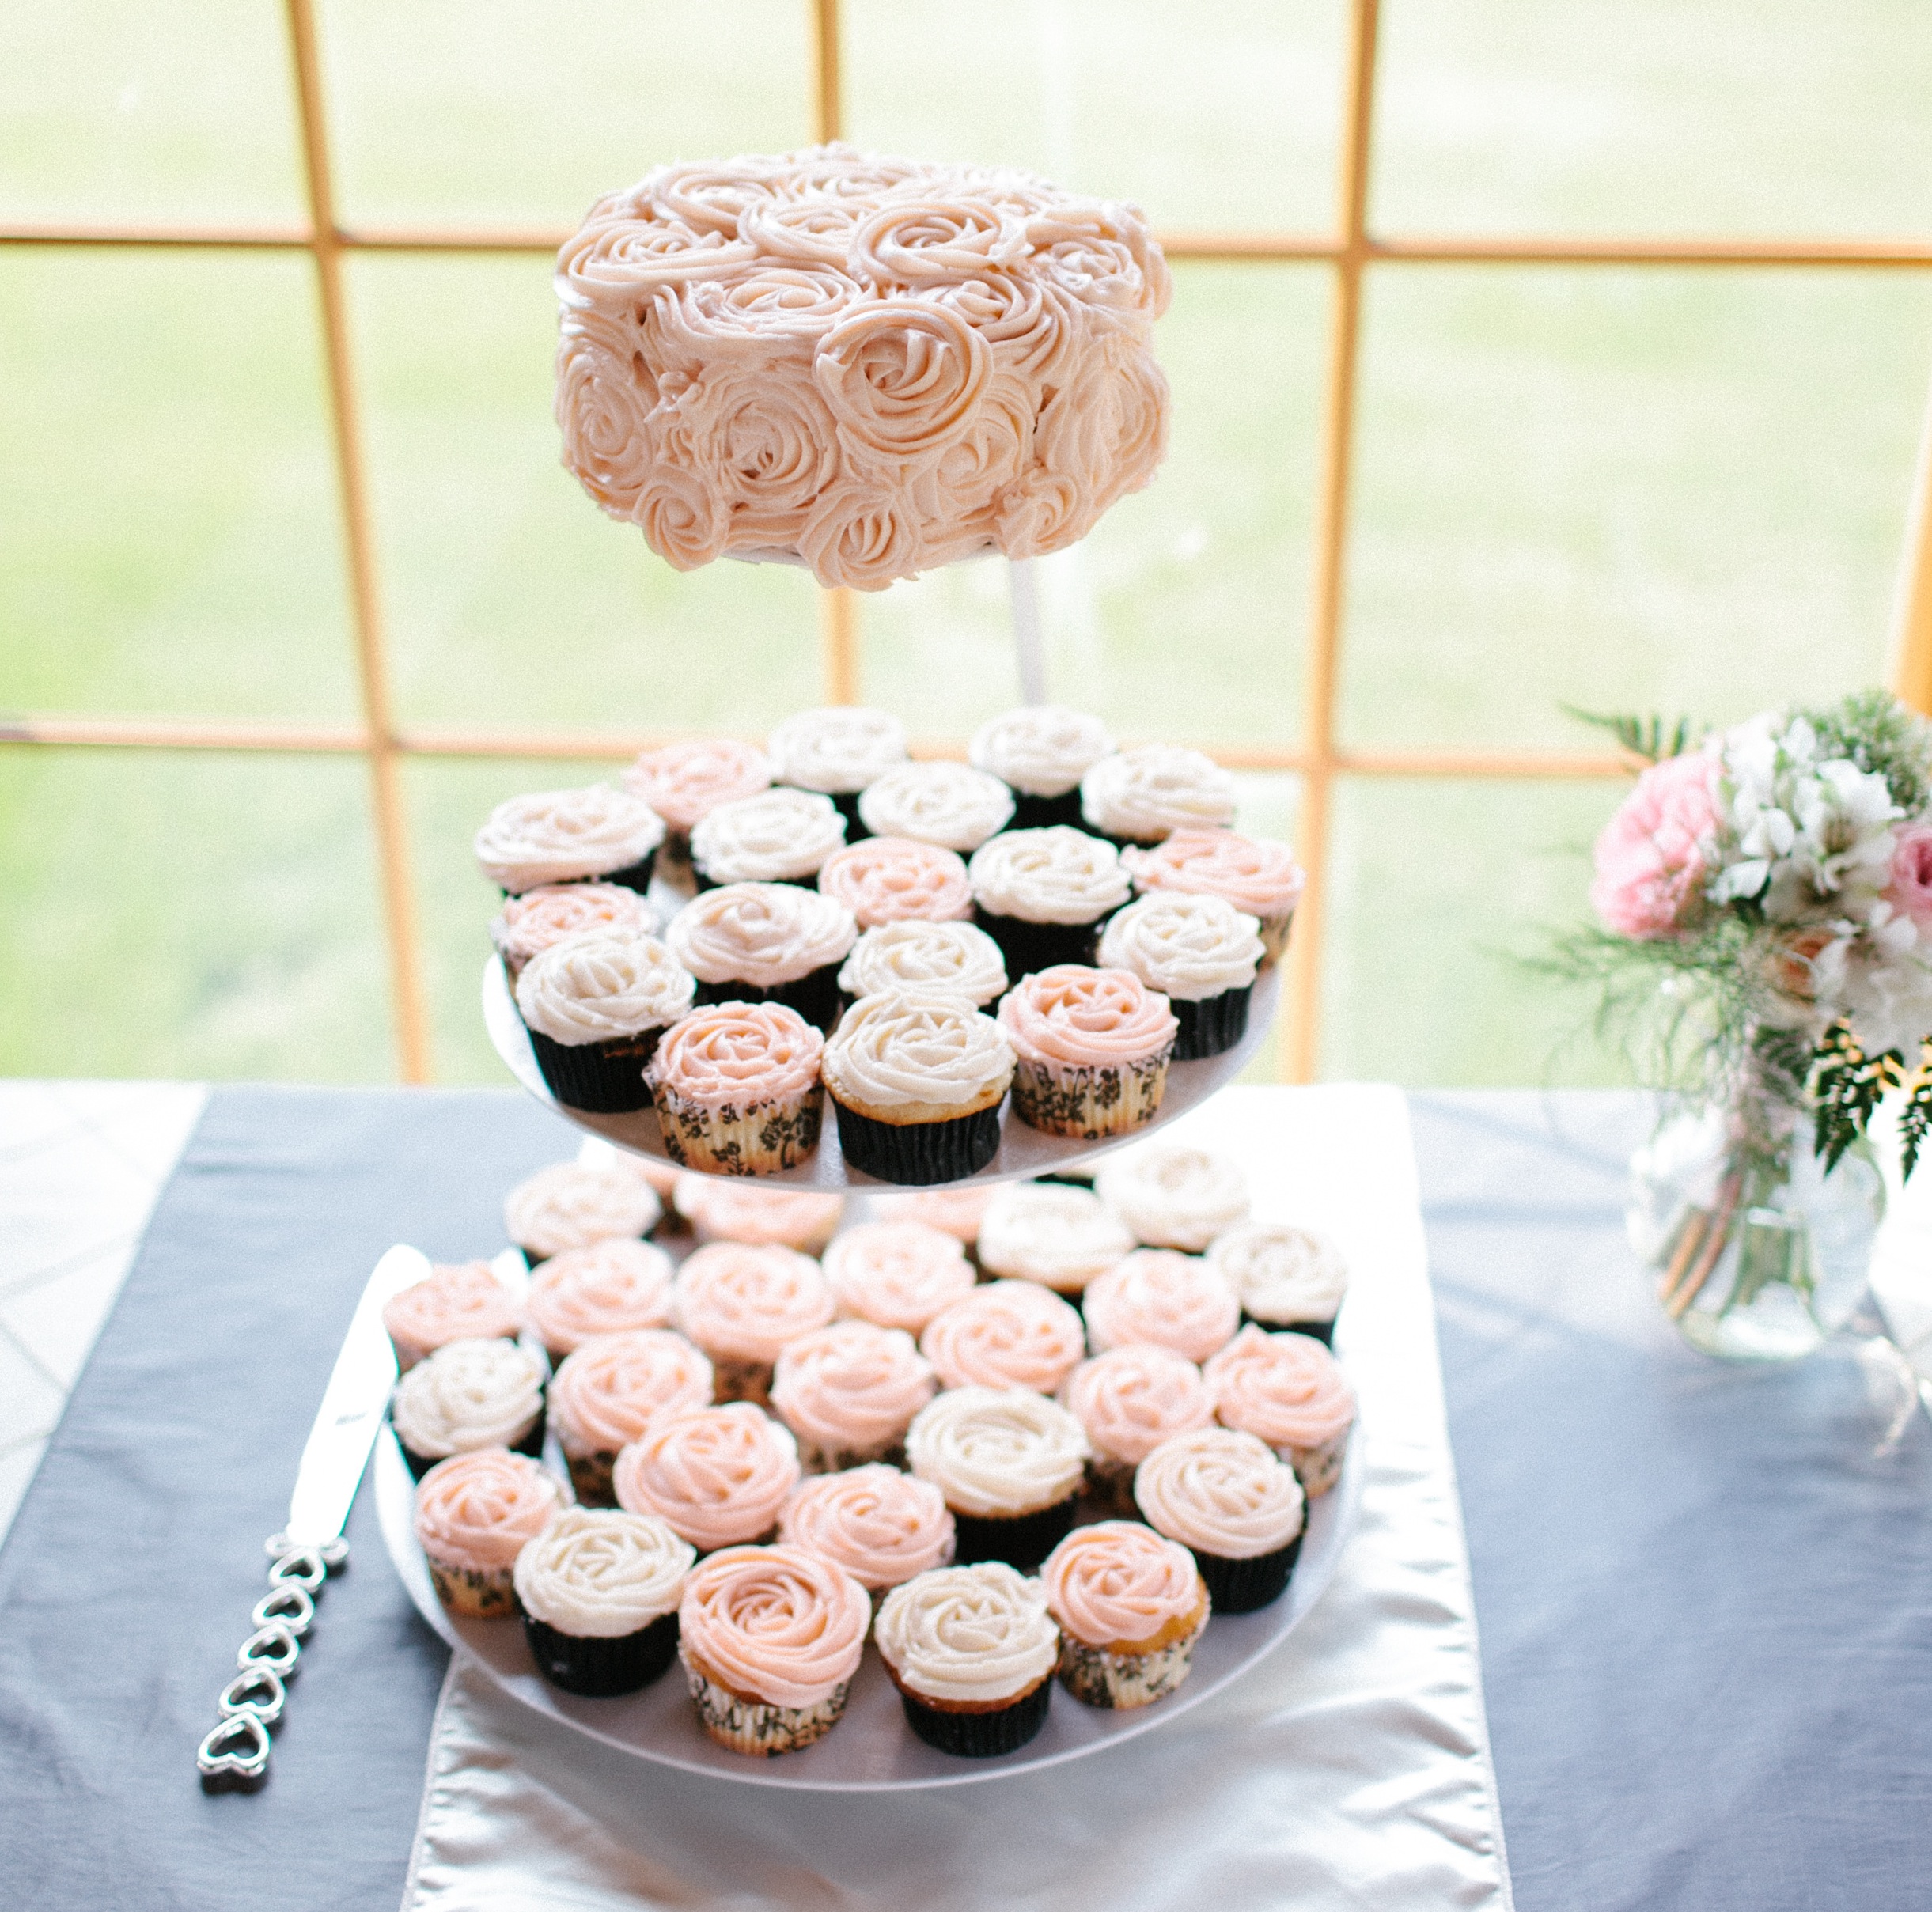  Light Pink Wedding Cupcakes topped with a Rosette Frosted Cake | photo by blf Studios | wedding by Madeline's Weddings 